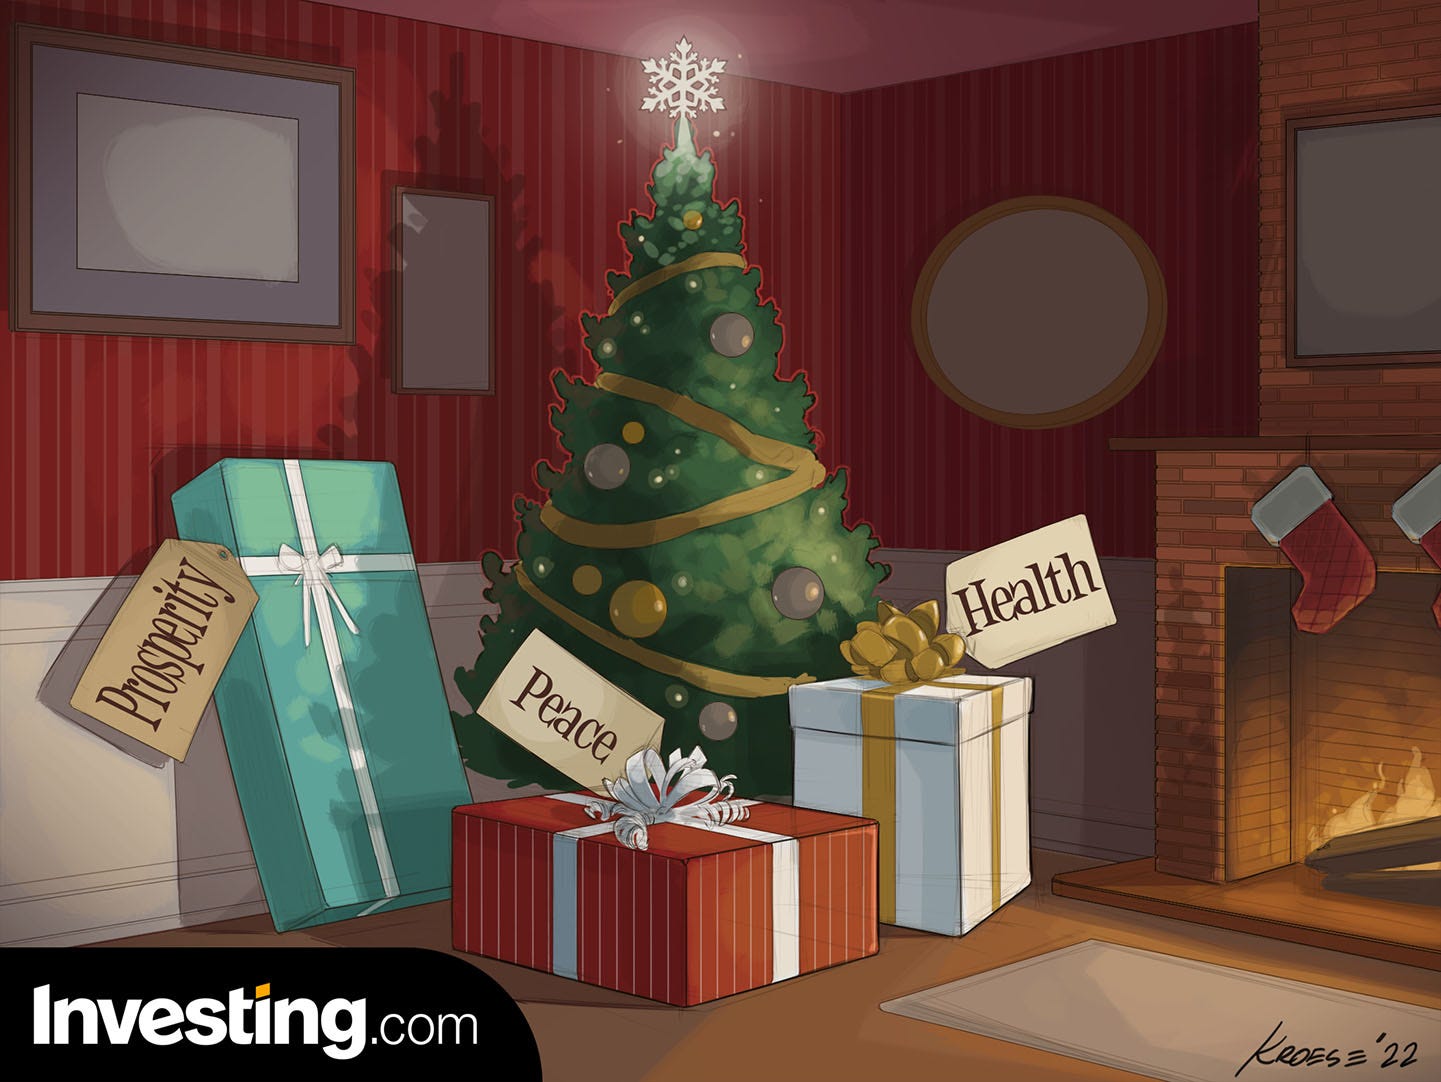 Merry Christmas! Investing.com wishes you health, peace and prosperity!